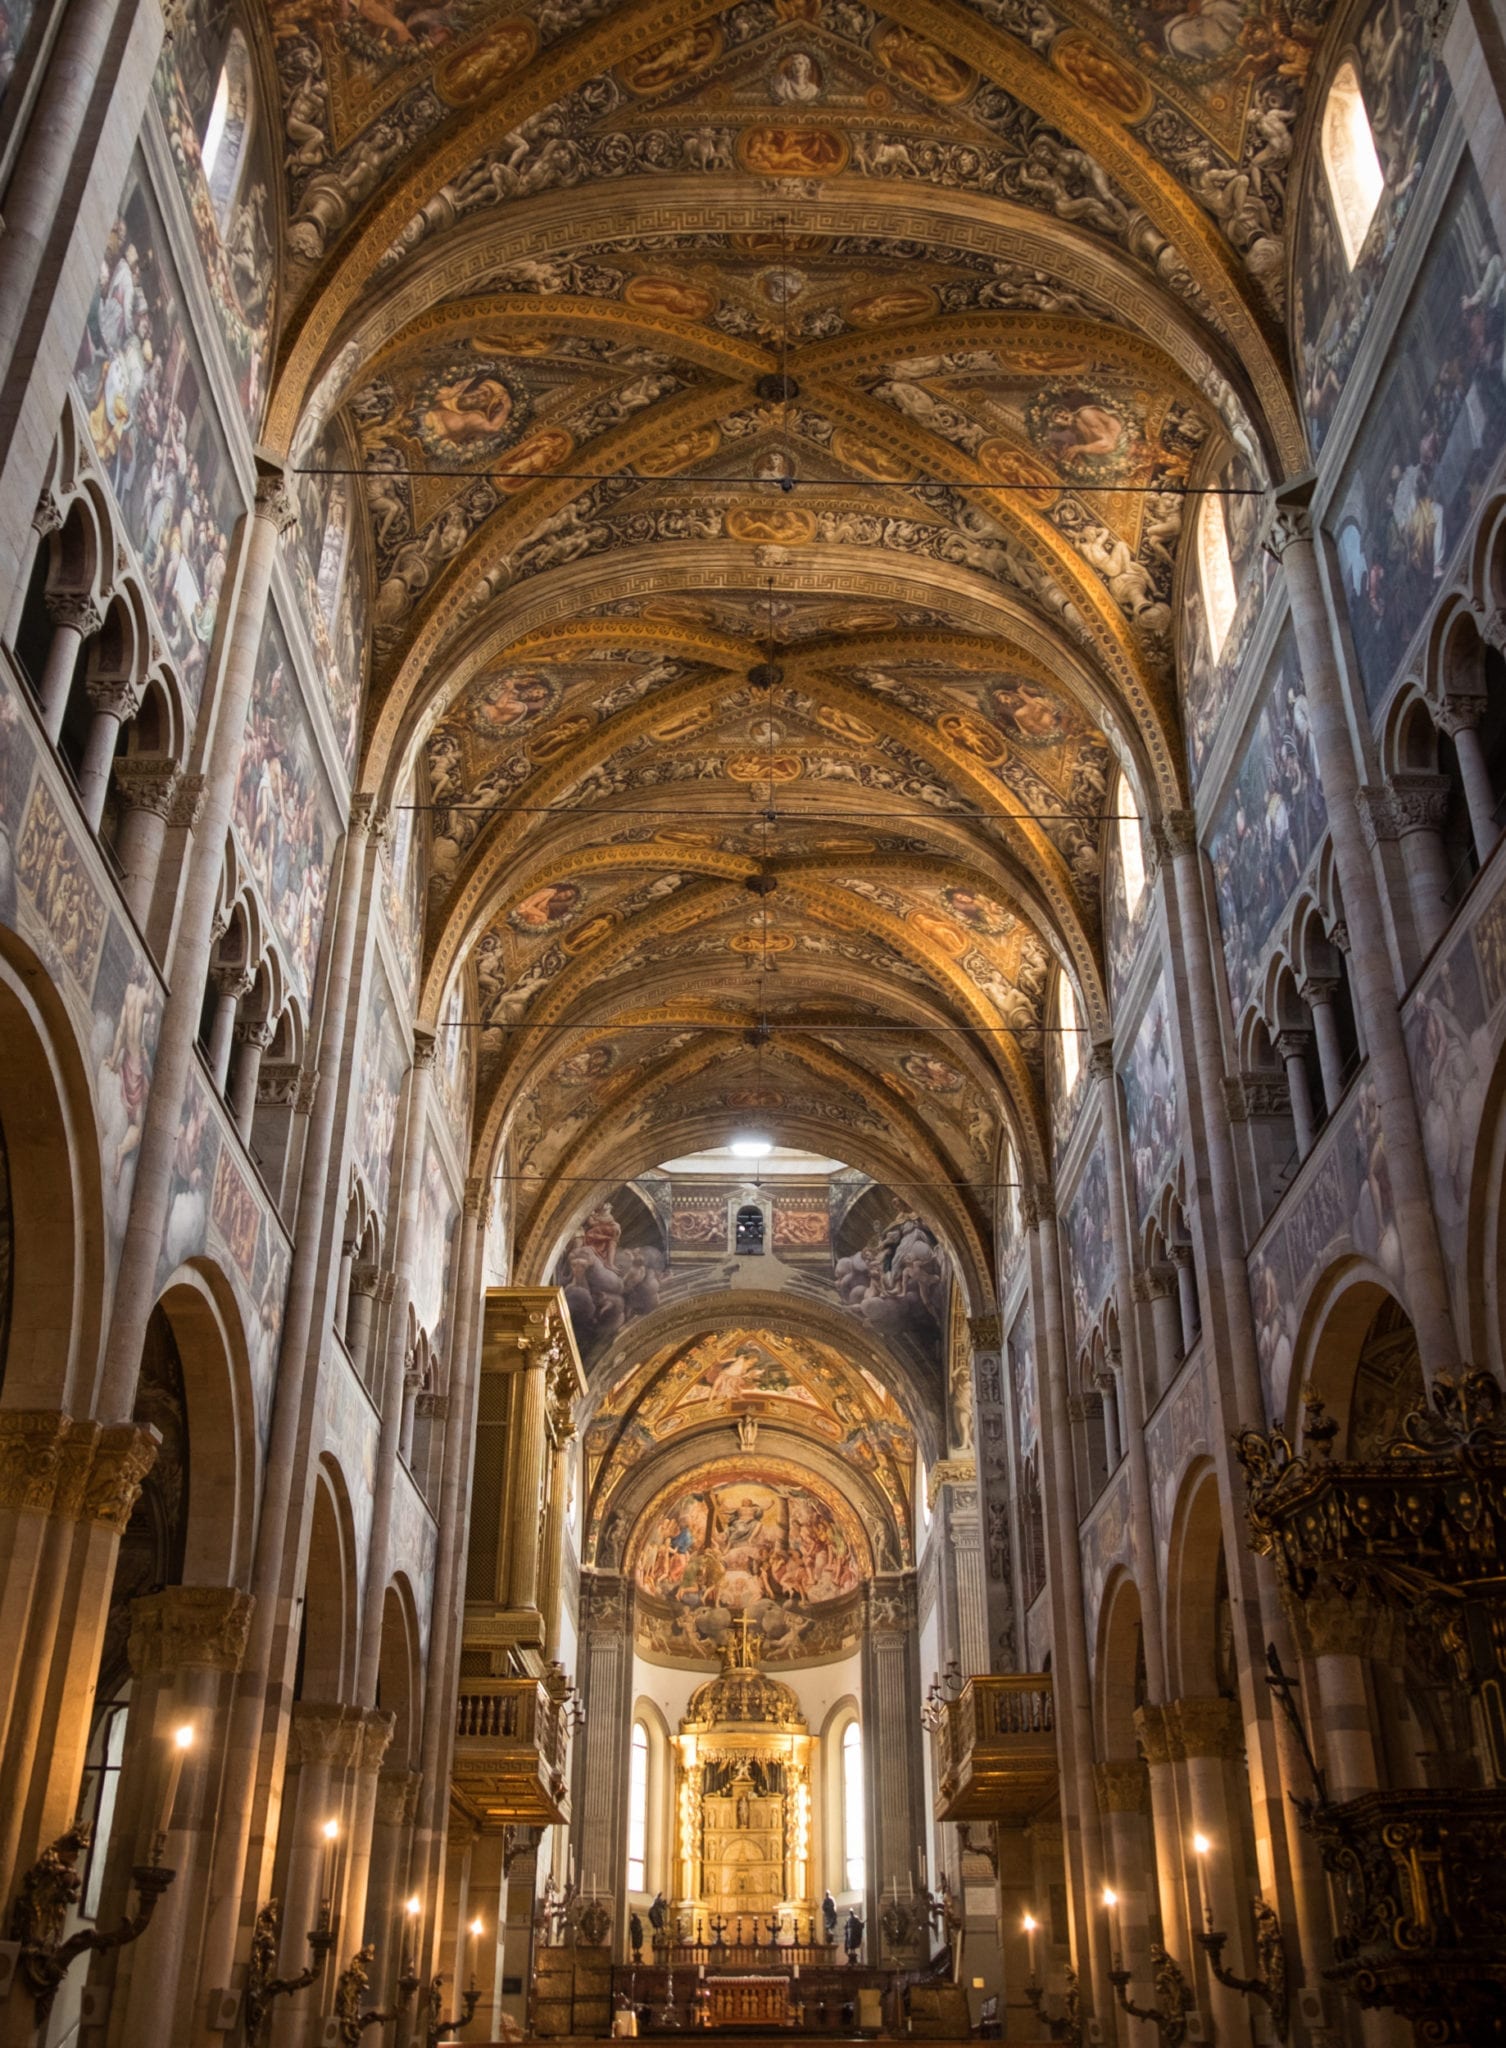 Parma's cathedral, leading back to the altar, each wall covered with paintings and ornate gold decoration.